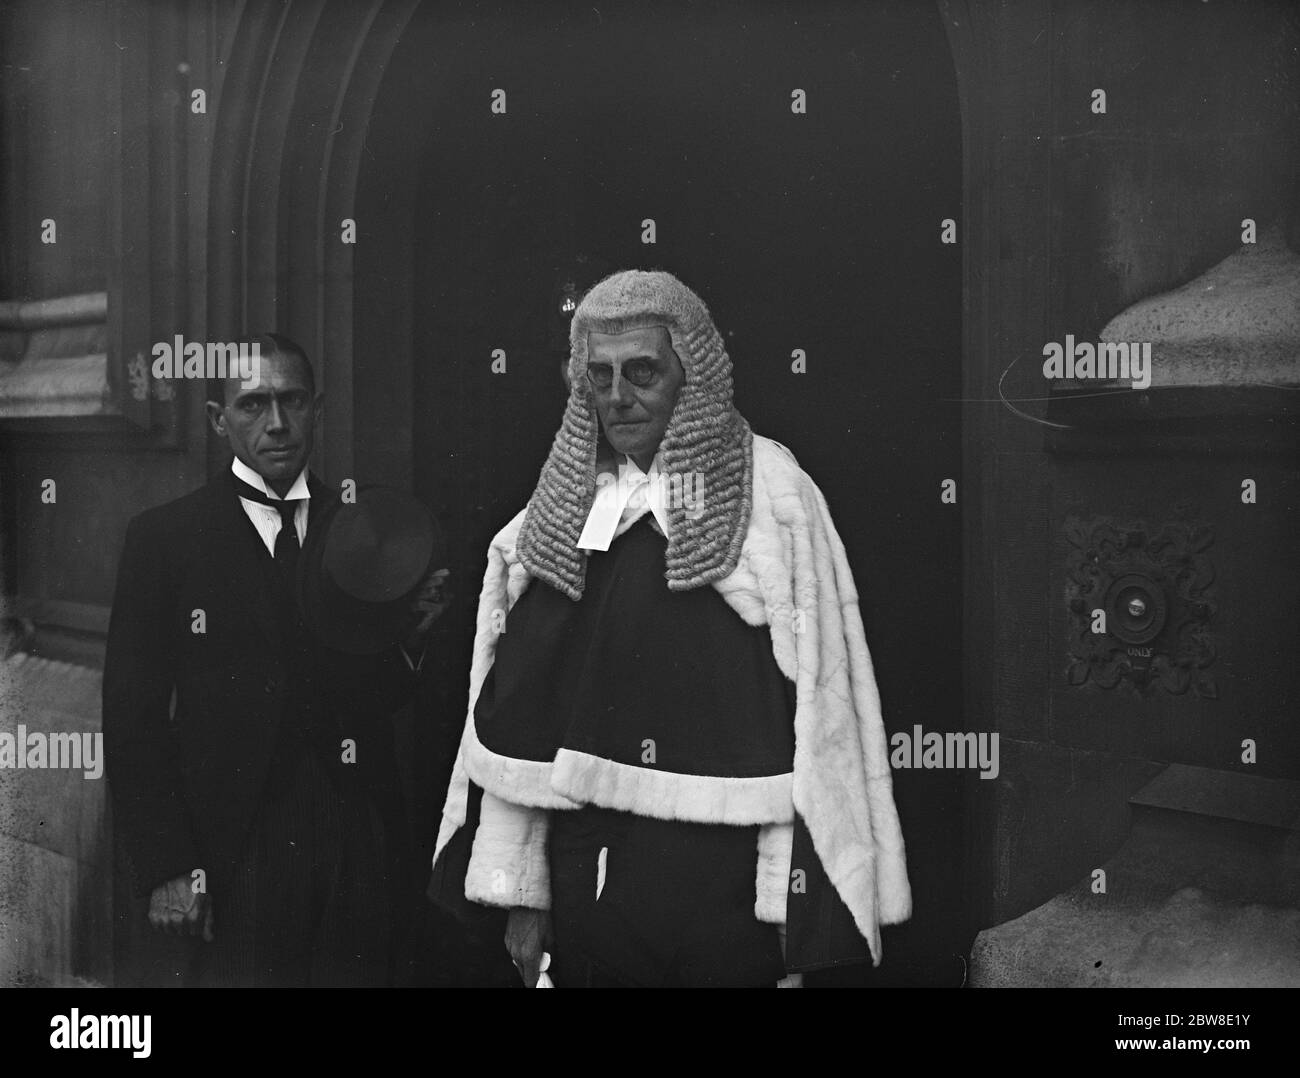 The new High Court judge sworn in . Mr Christopher John W Farwell , KC , was sworn in by the Lord Chancellor at the House of Lords as a judge of the Chancery Division of the High Court . Mr C J W Farwell , KC , arriving at the House of Lords . 13 October 1929 Stock Photo